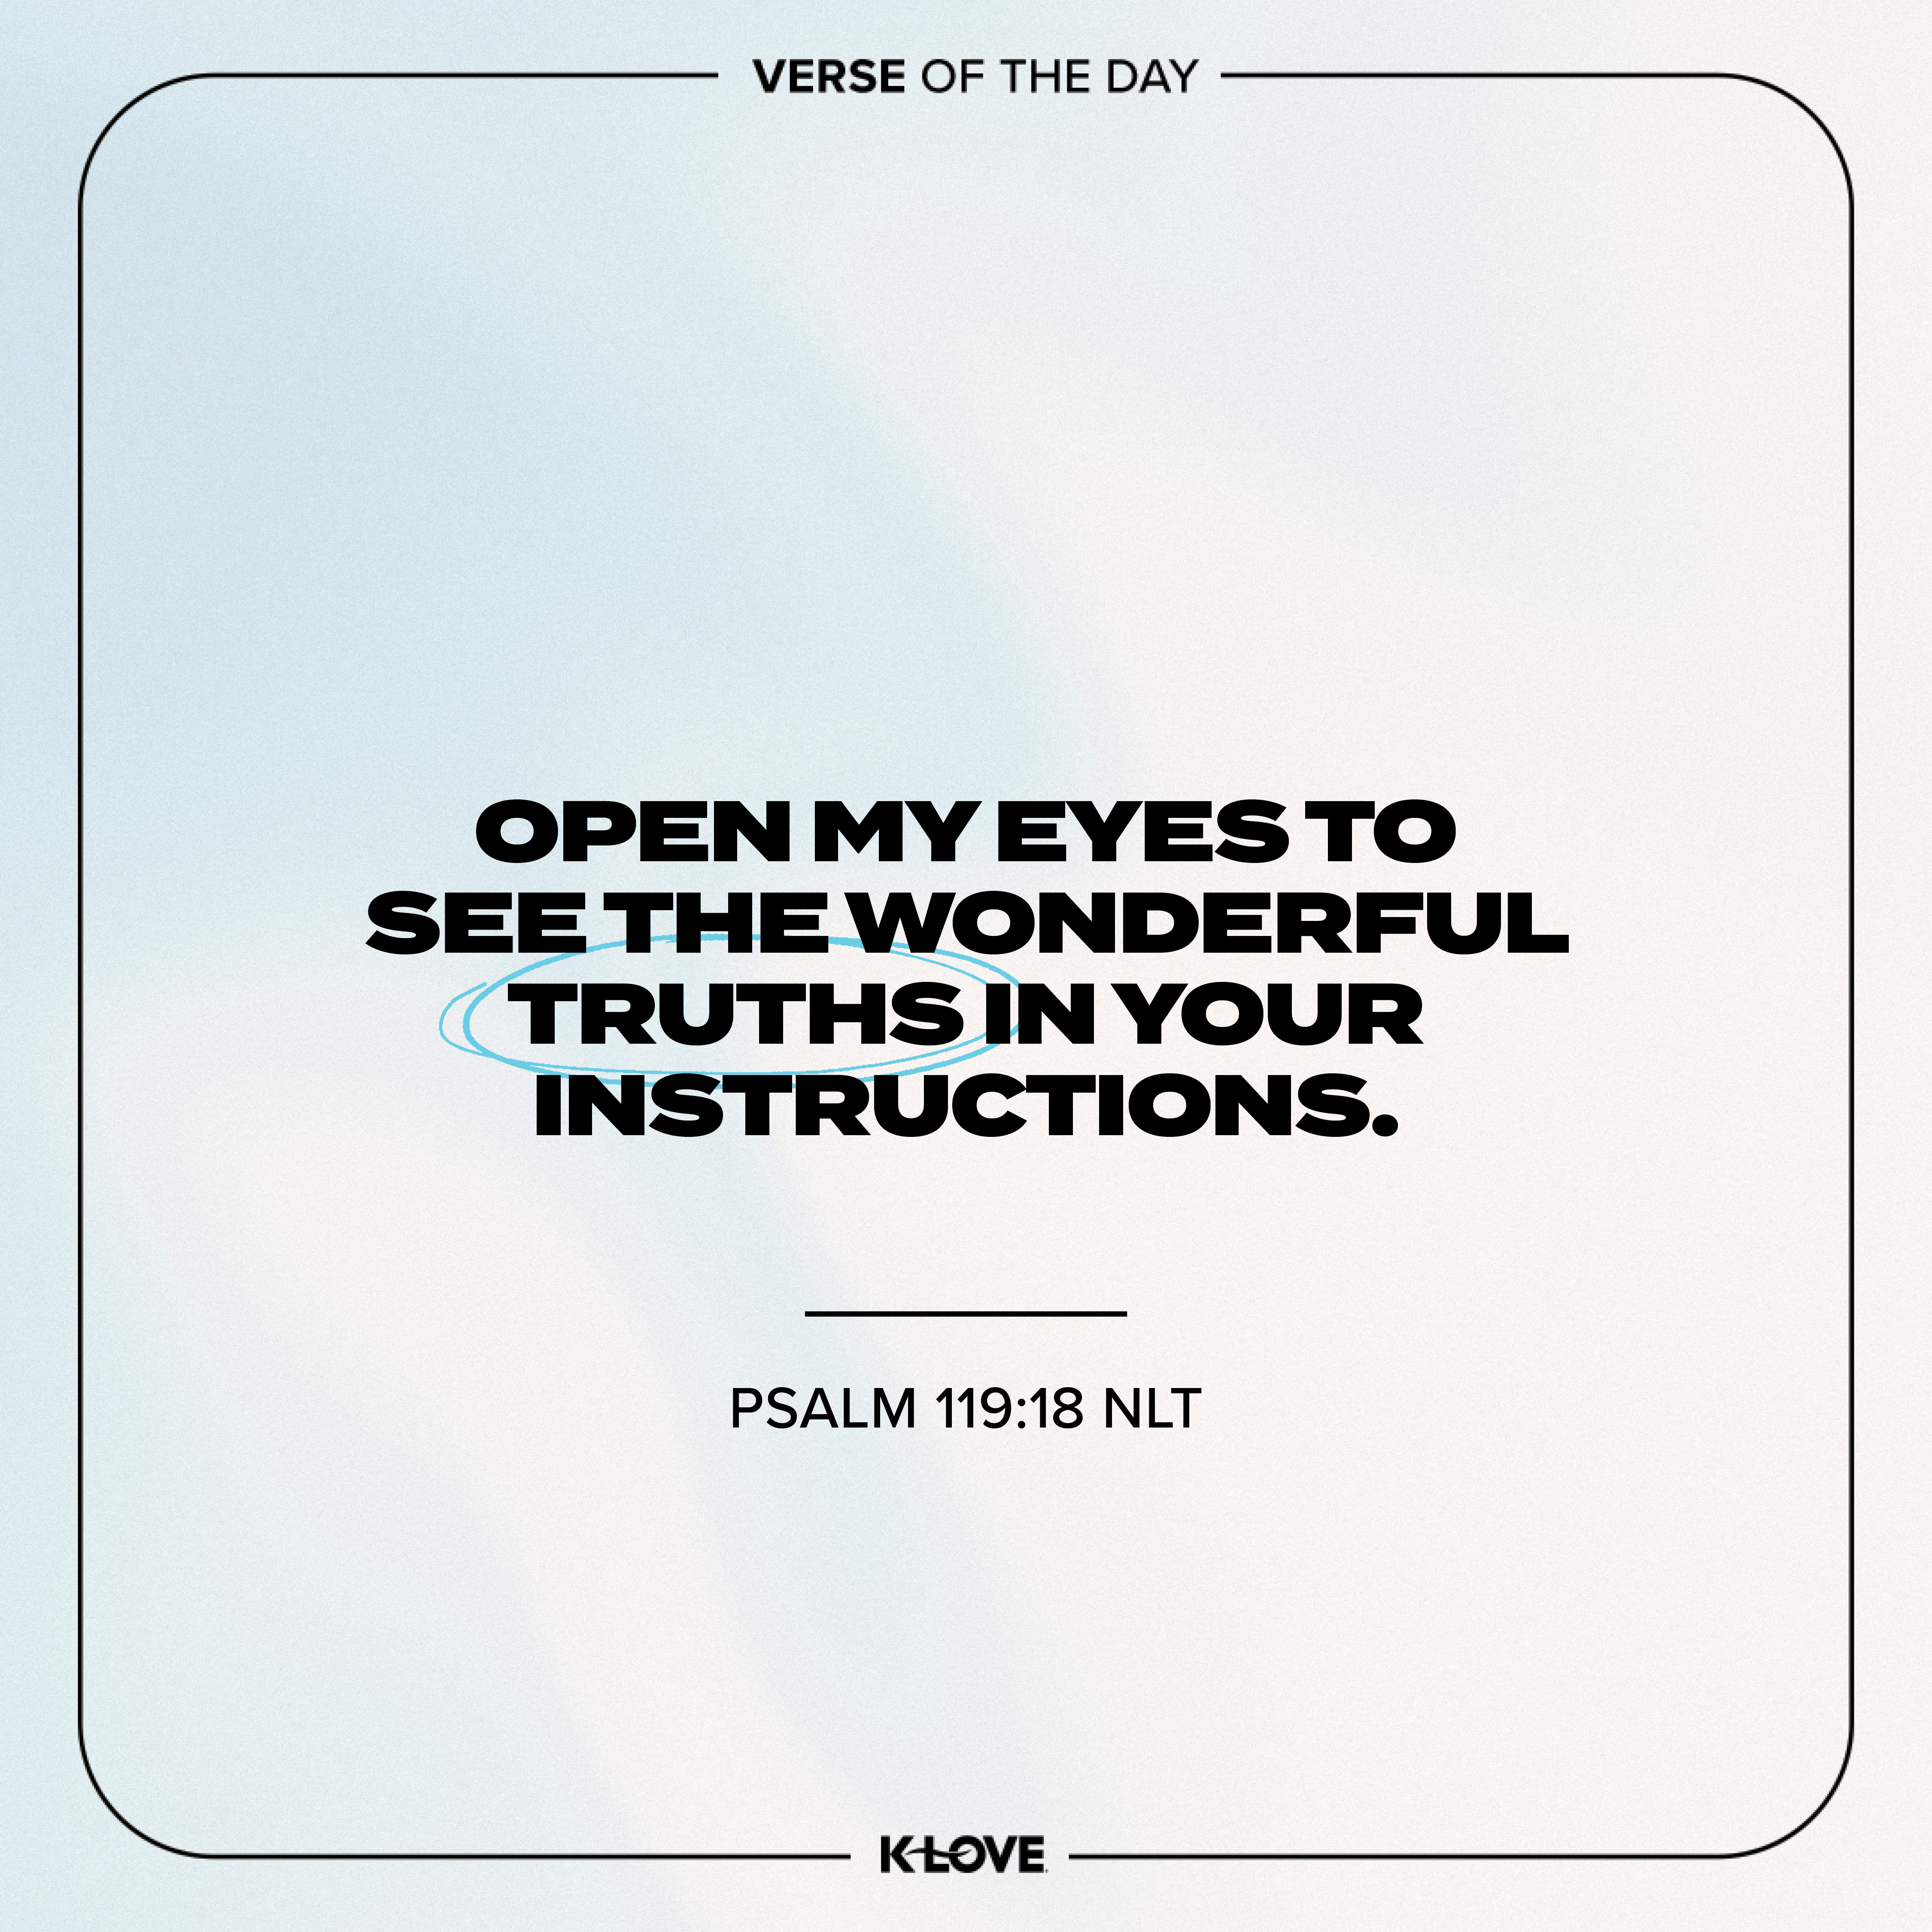 Open my eyes to see the wonderful truths in Your instructions.